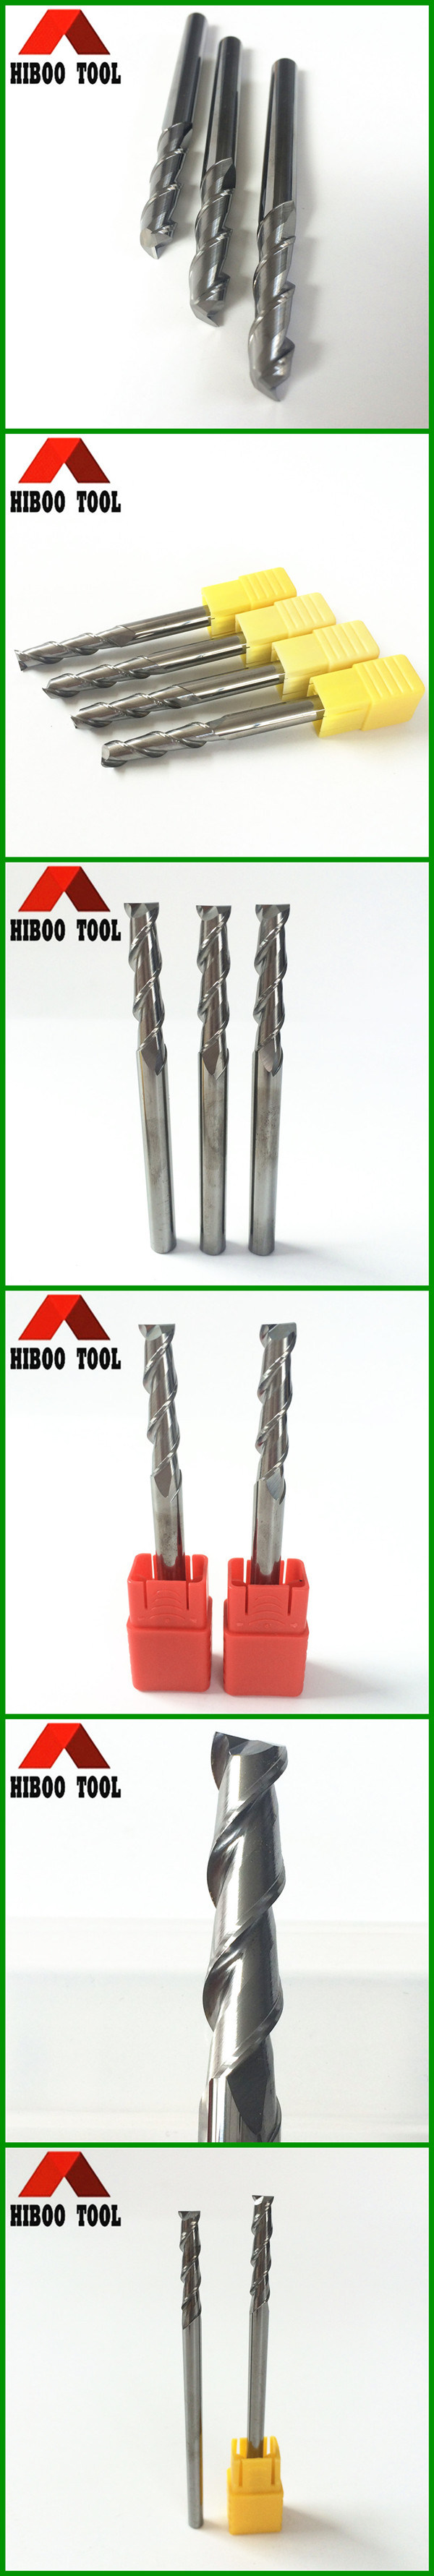 China Factory Carbide End Mill Cutter for Aluminum